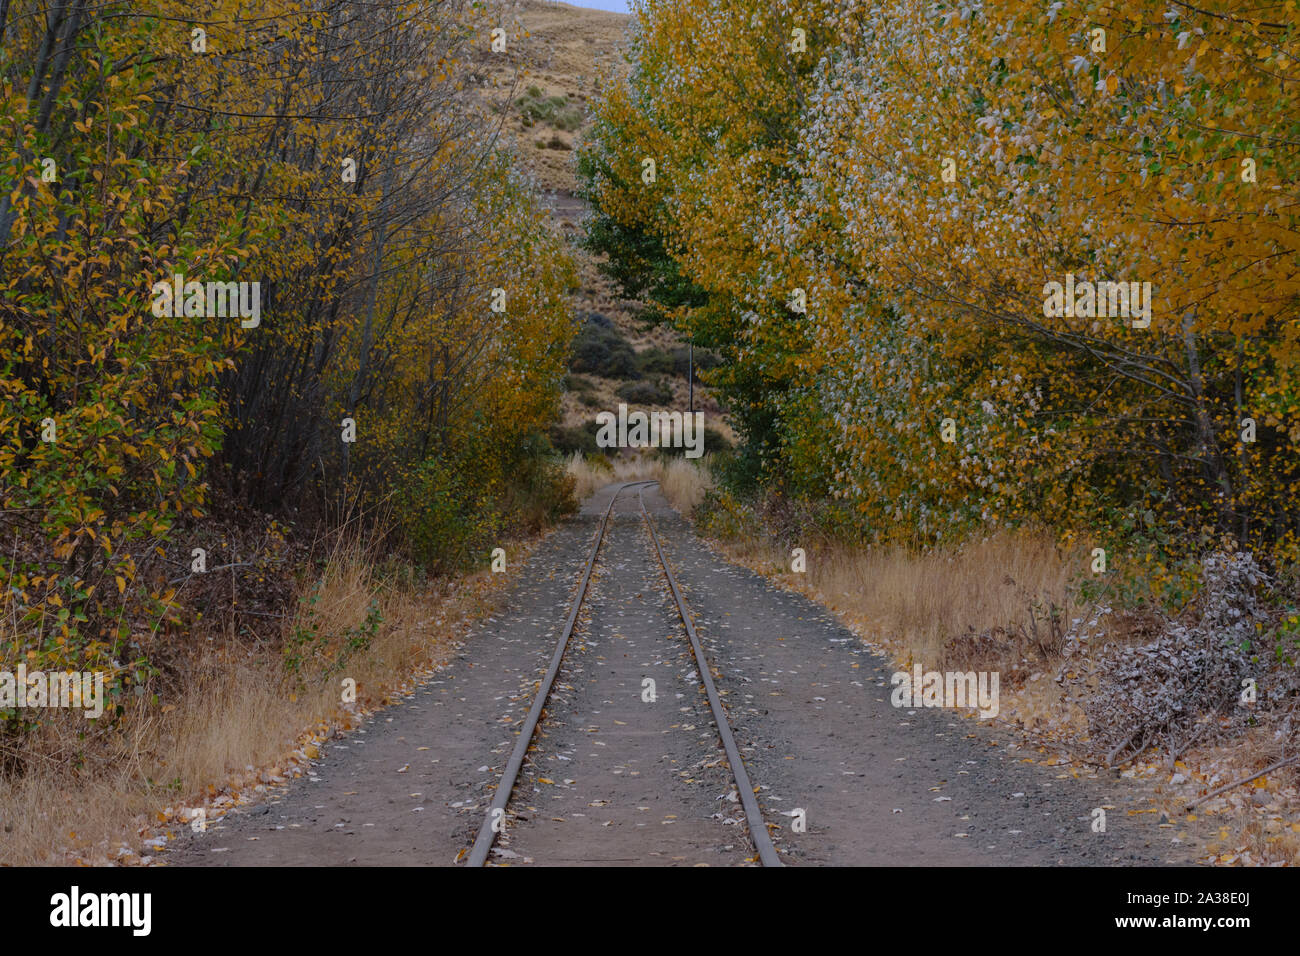 Country railway in autumn forest Stock Photo